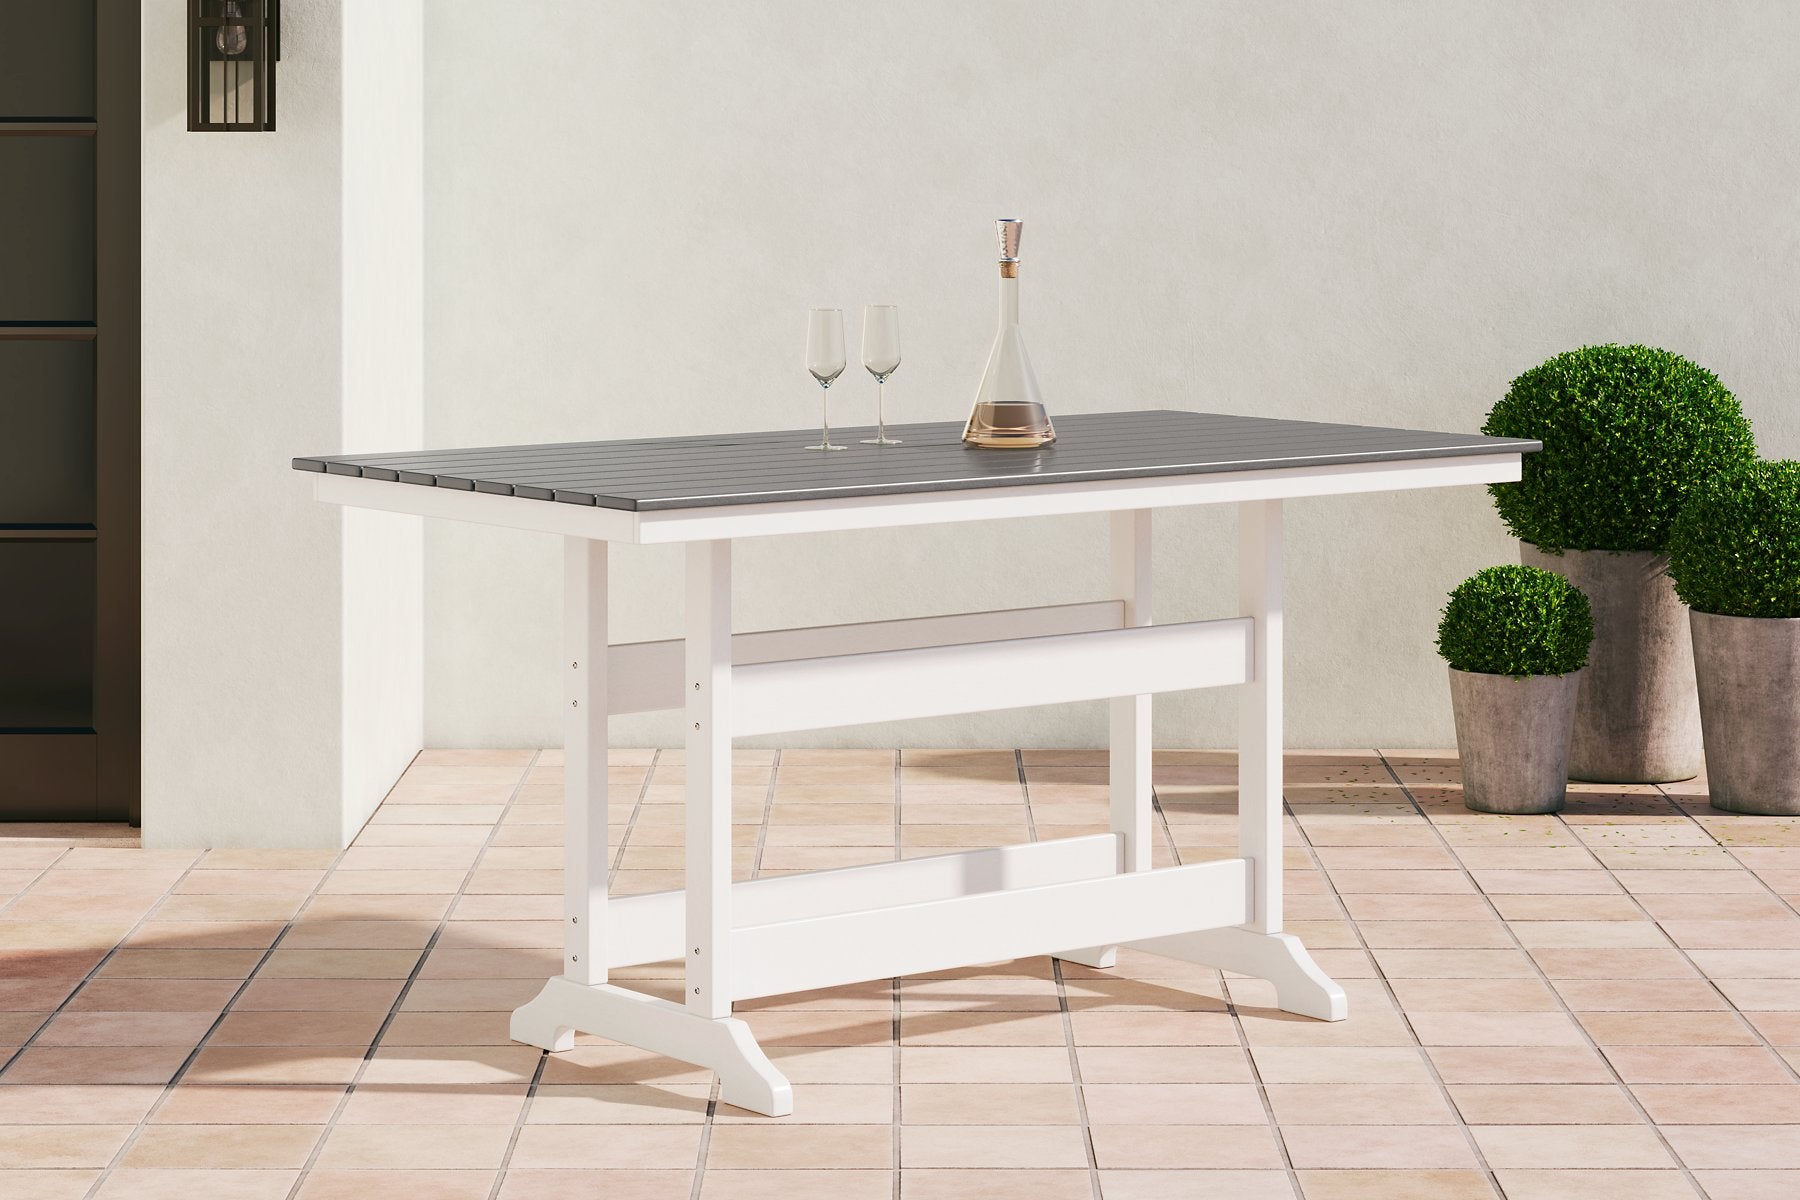 Transville Outdoor Counter Height Dining Table - Half Price Furniture